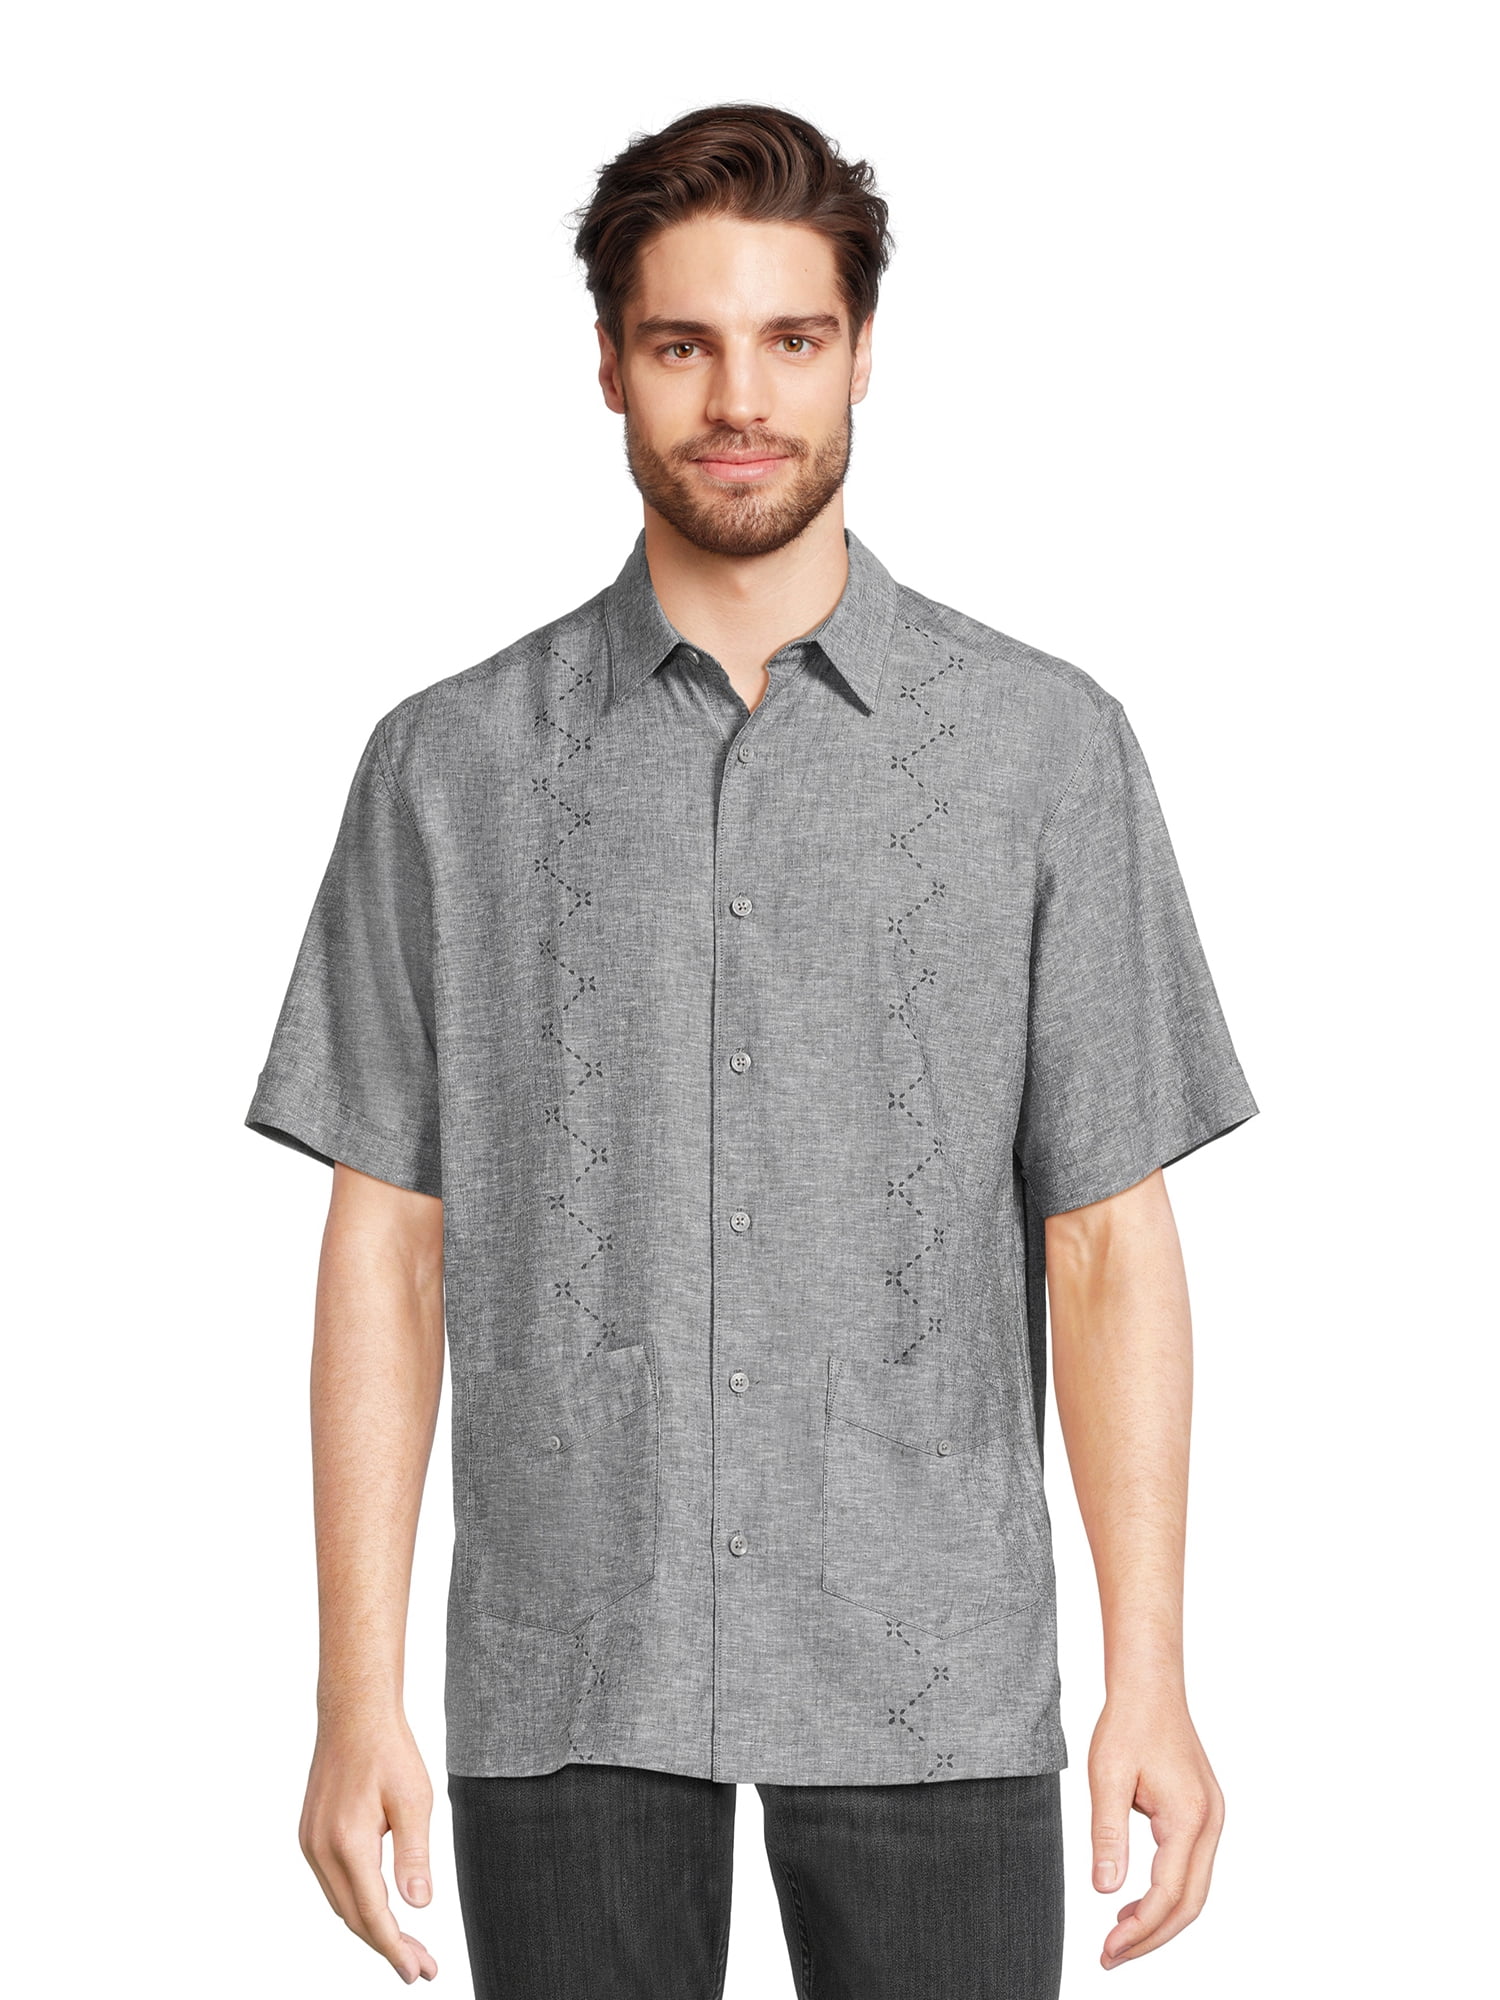 Cafe Luna Men's Crossed Panel Print Woven Guayabera Shirt with Two ...